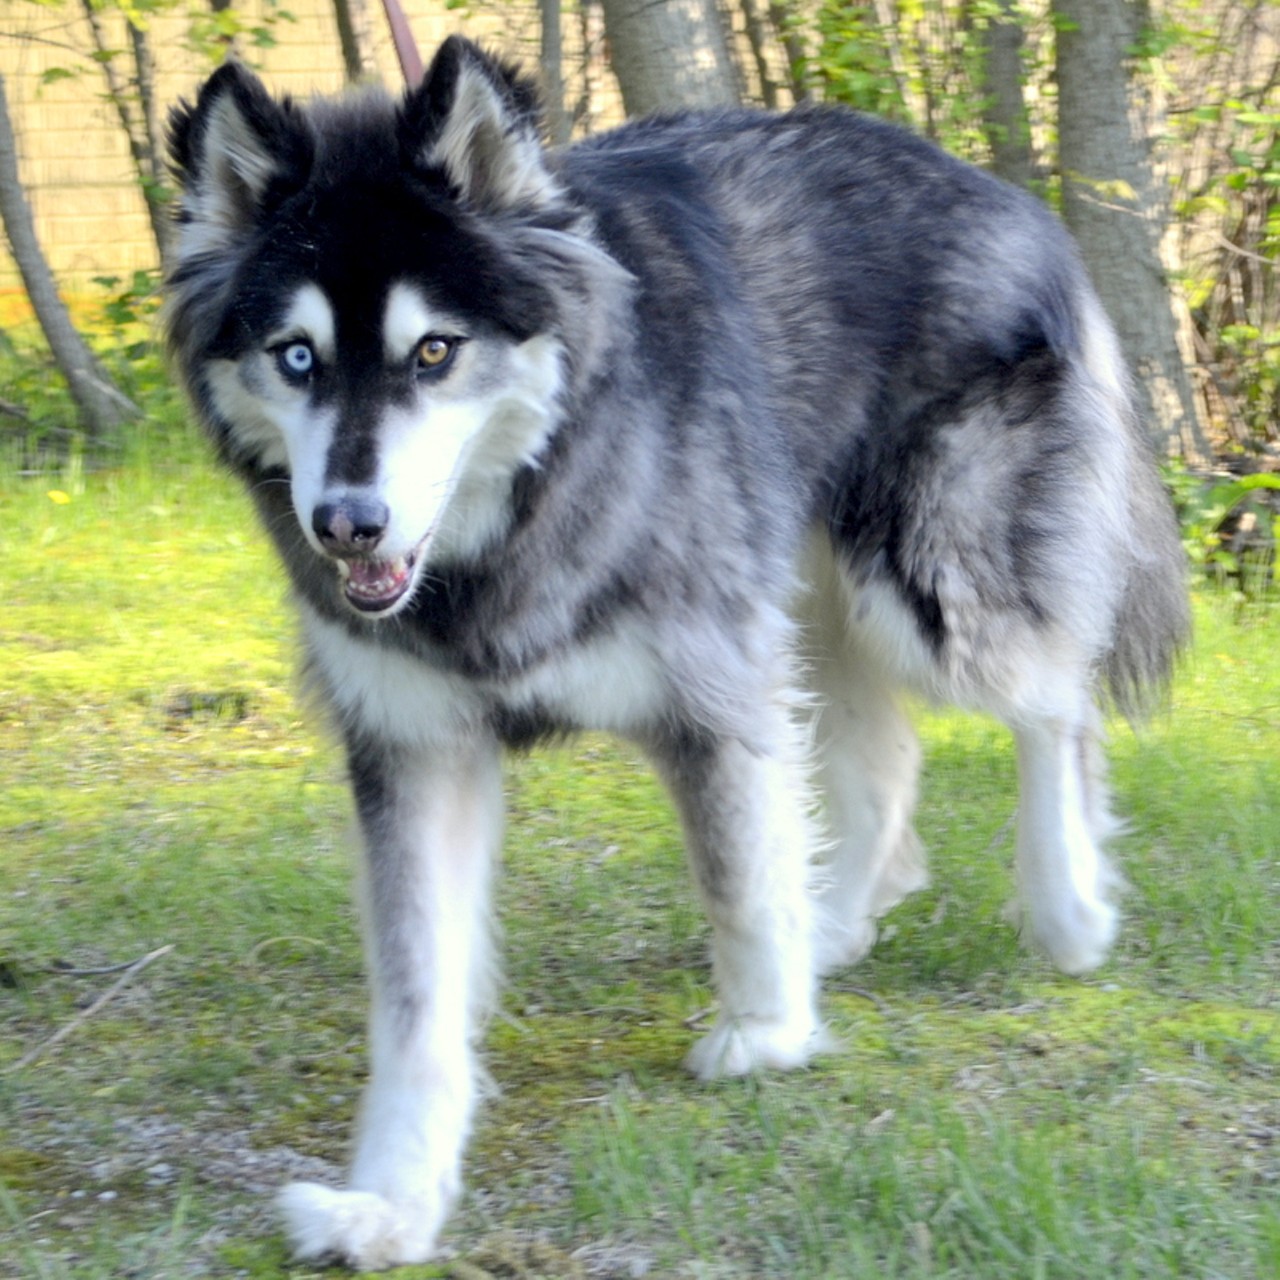 NAME:  Sylas 
GENDER: Male
BREED: Siberian Husky-Alaskan Malamute mix
AGE: 6 years, 8 months
WEIGHT: 64 pounds
SPECIAL CONSIDERATIONS: Prefers a home with older or no children where he can be vocal
REASON I CAME TO MHS: Owner surrender
LOCATION: Berman Center for Animal Care in Westland
ID NUMBER: 805472